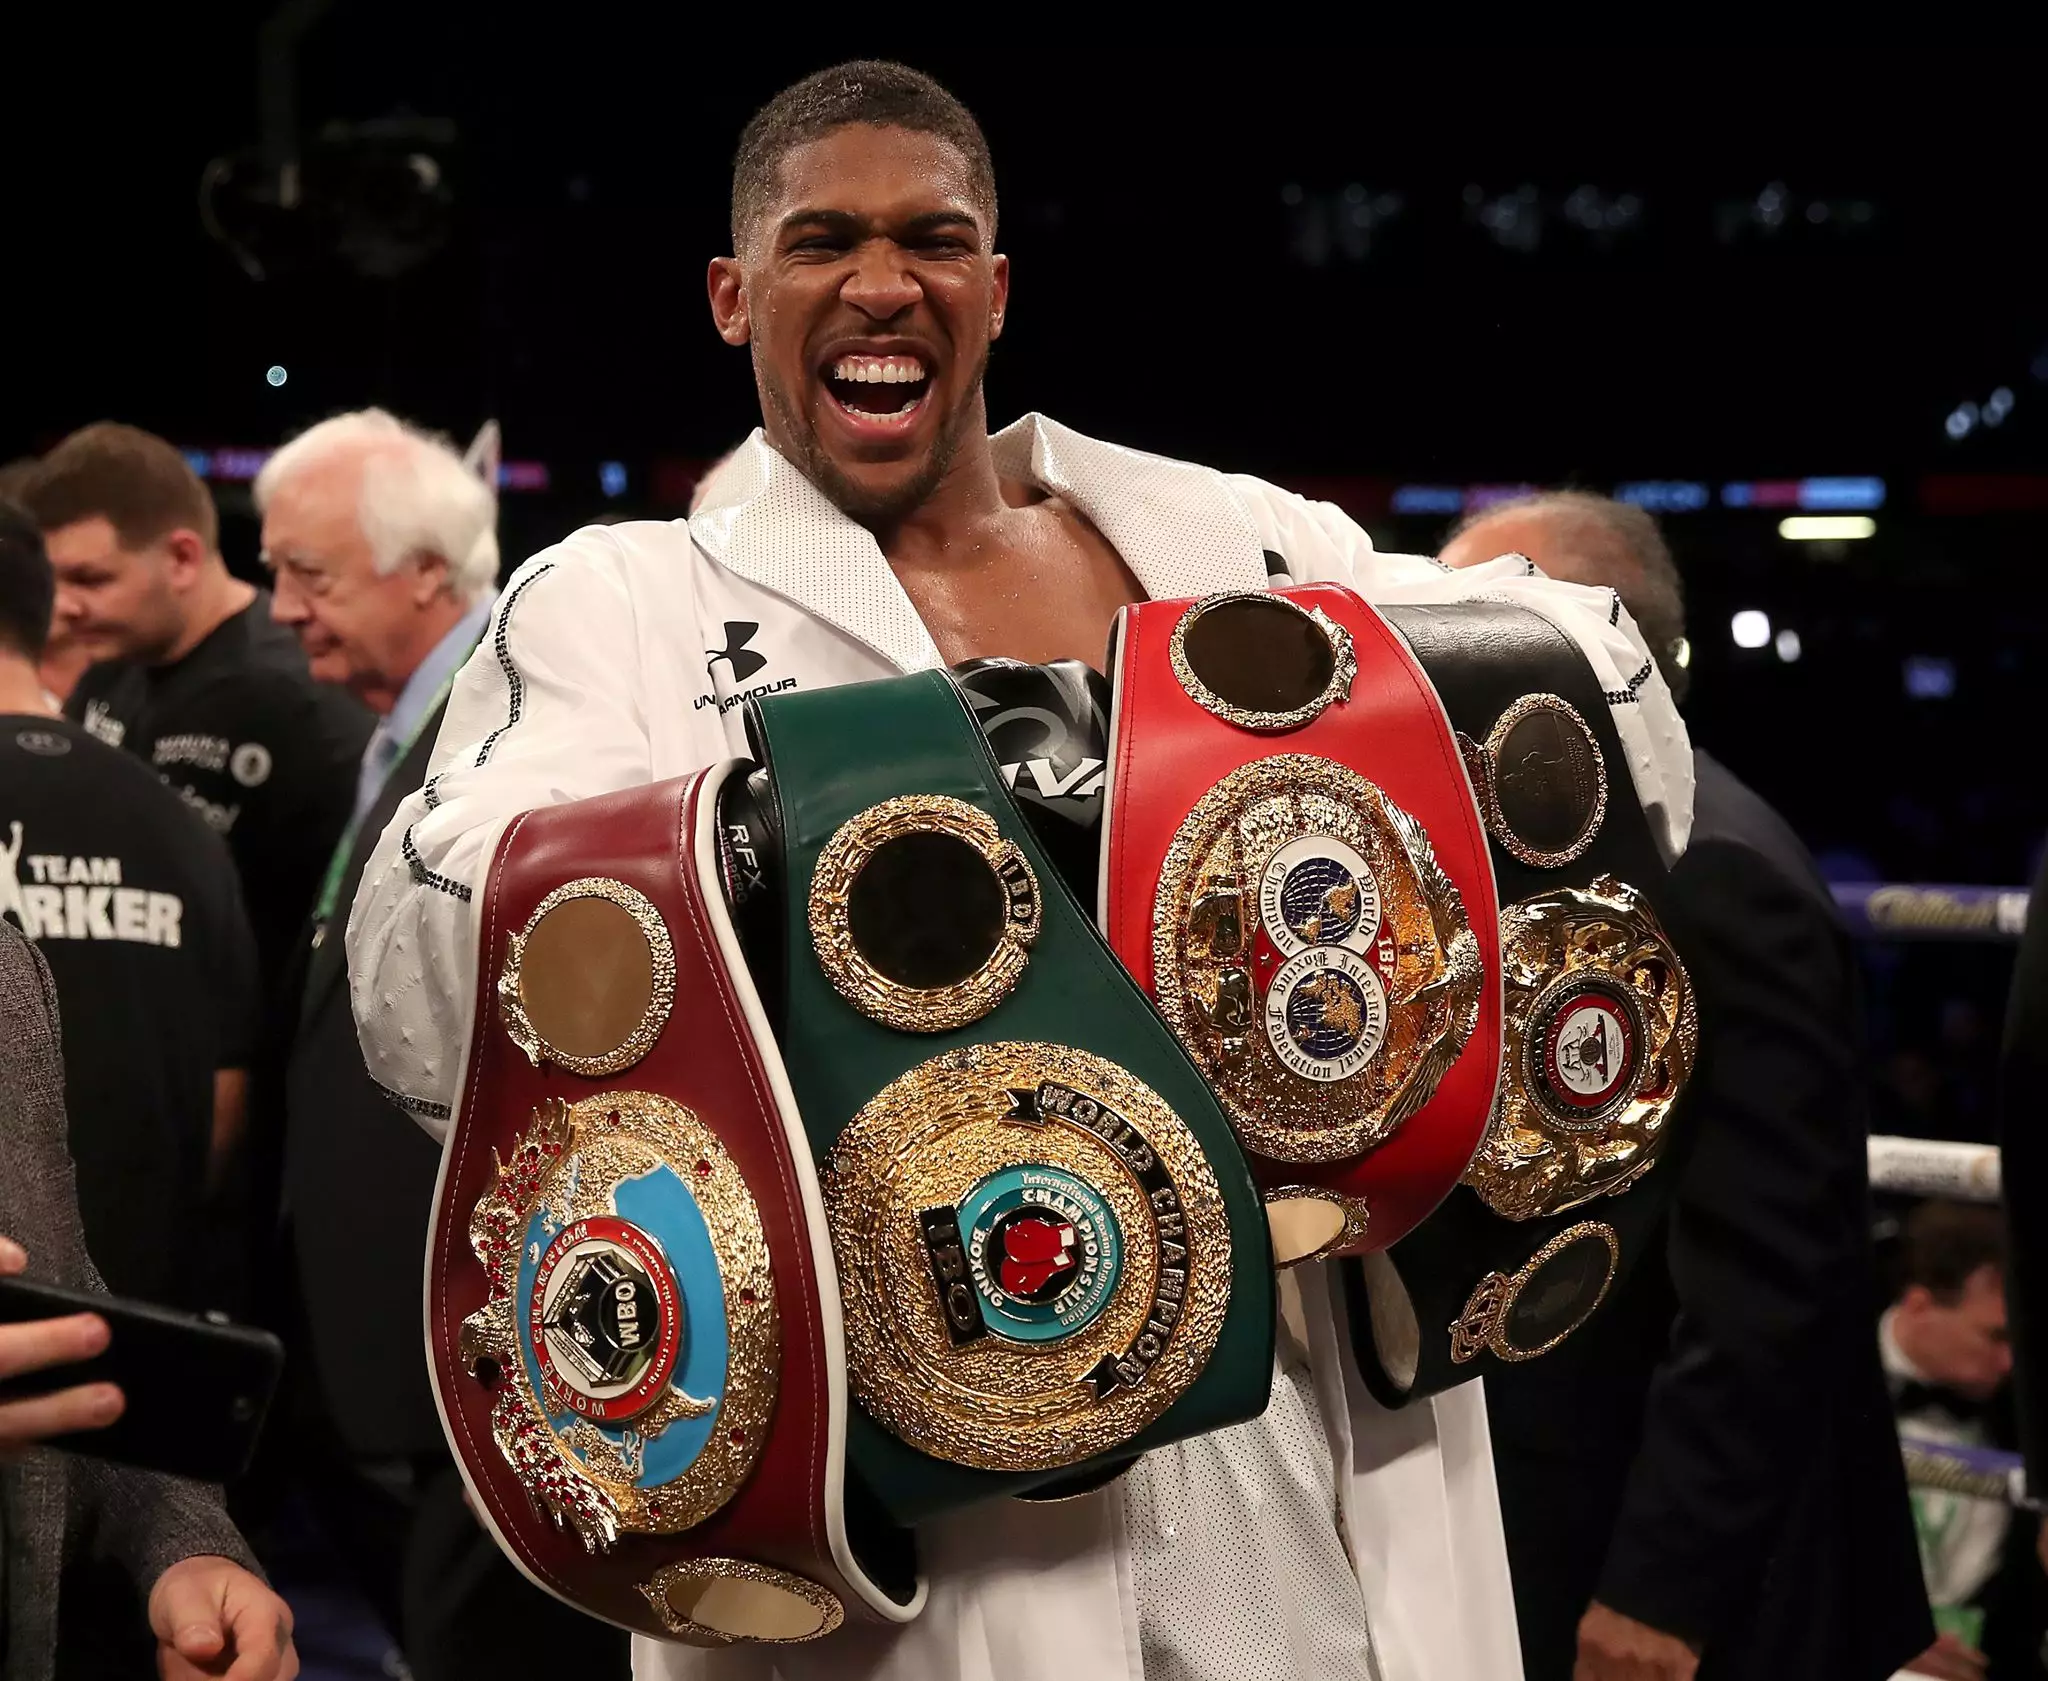 Joshua after his 21st professional victory against Joseph Parker. Image: PA